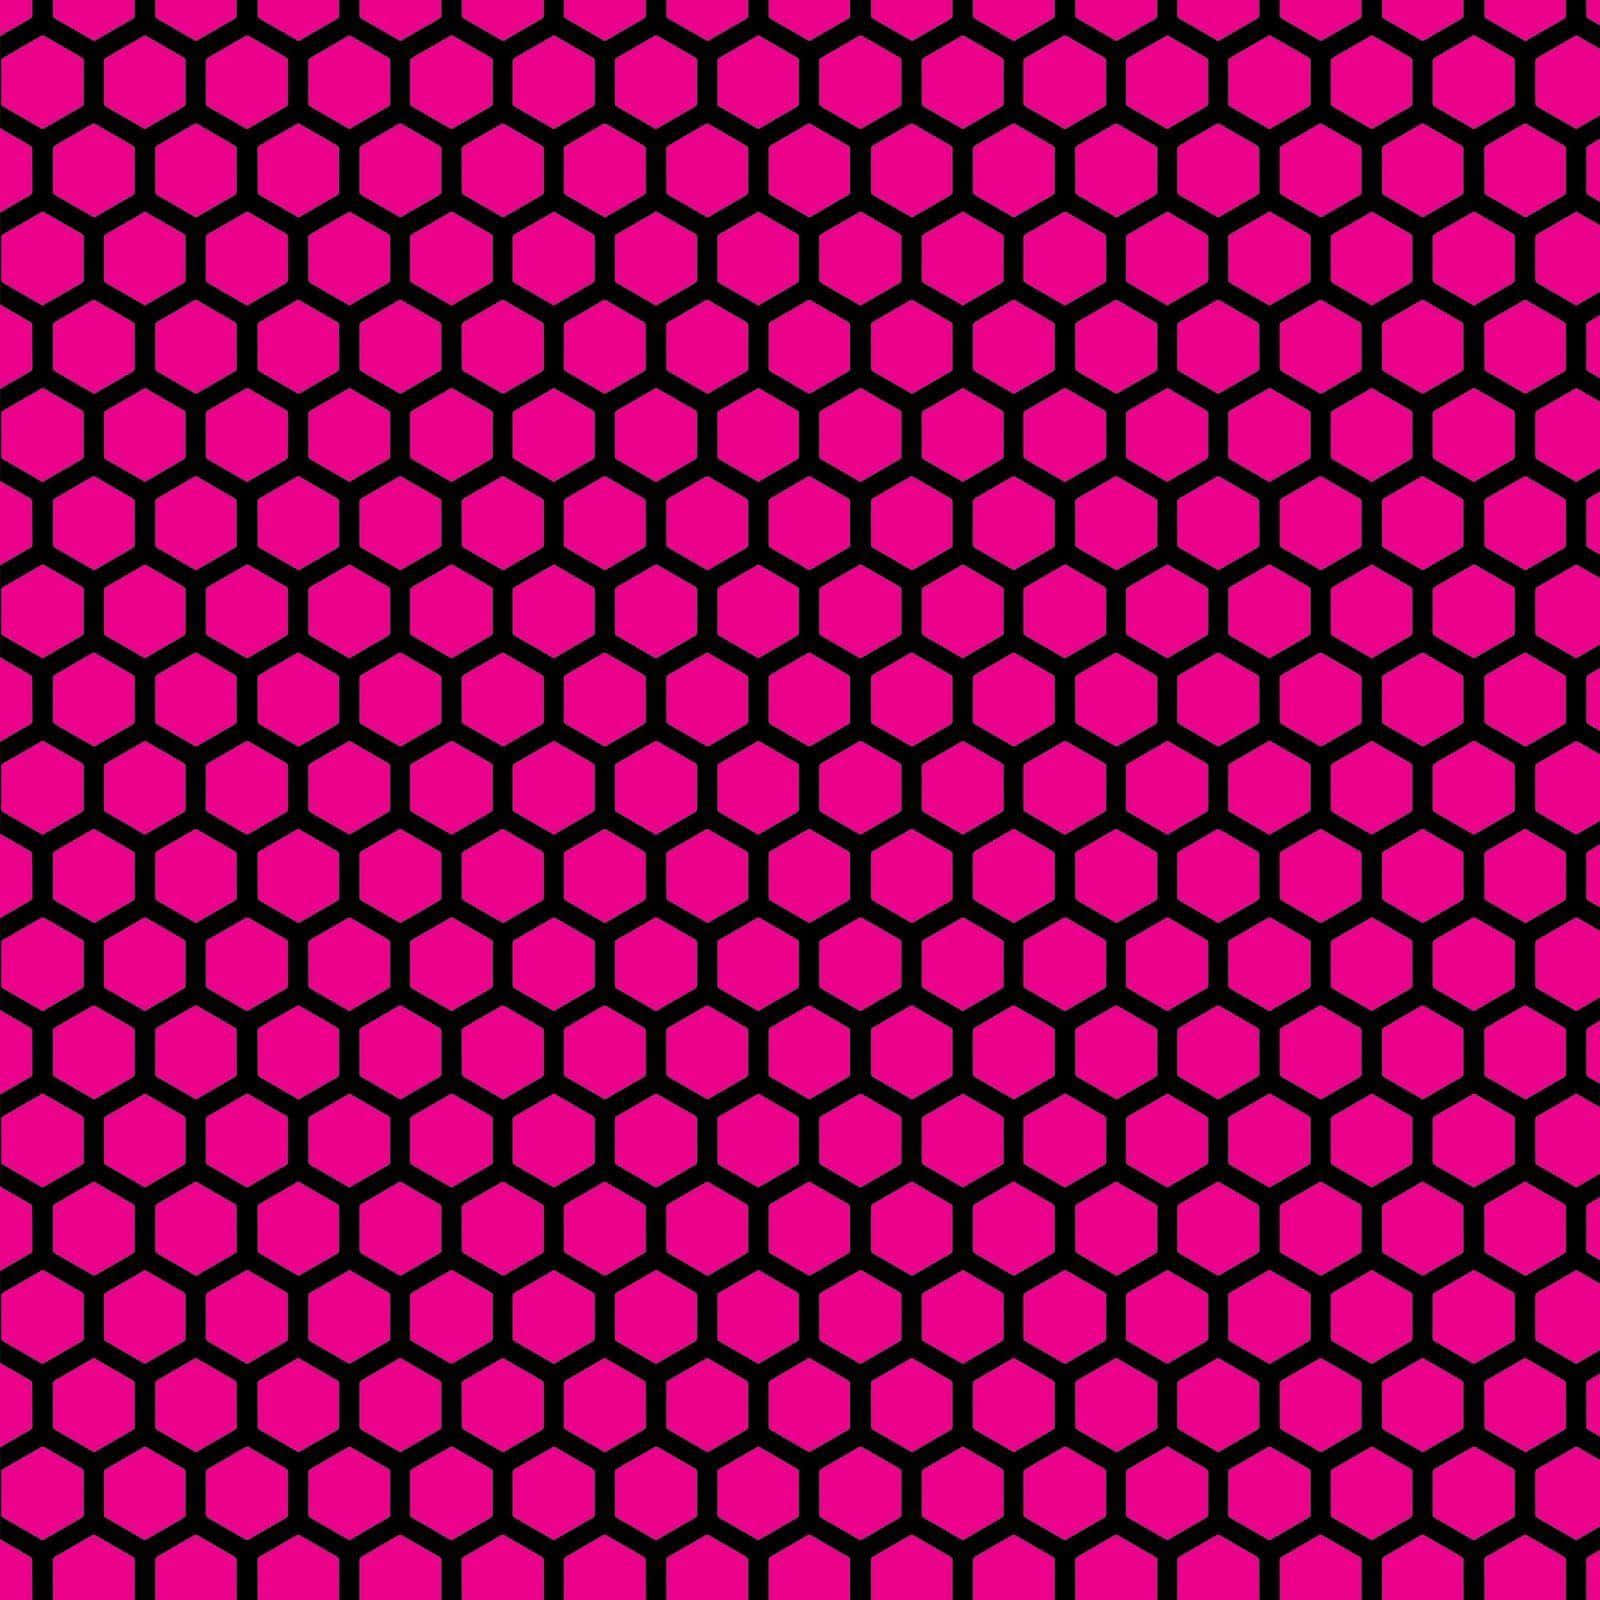 A vibrant, neon pink background with a fun pattern Wallpaper